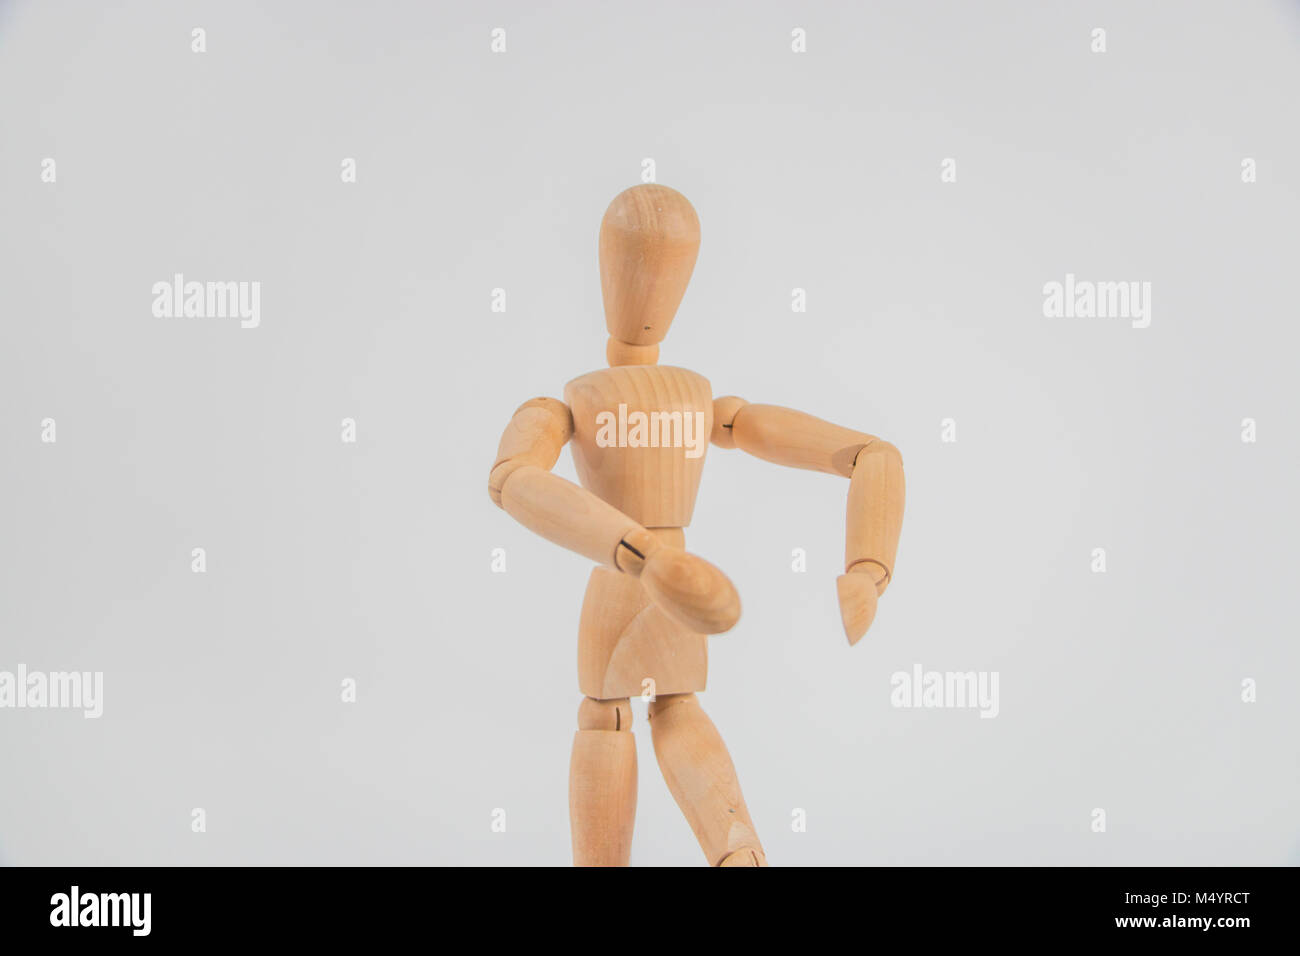 Wooden drawing puppet posing Stock Photo